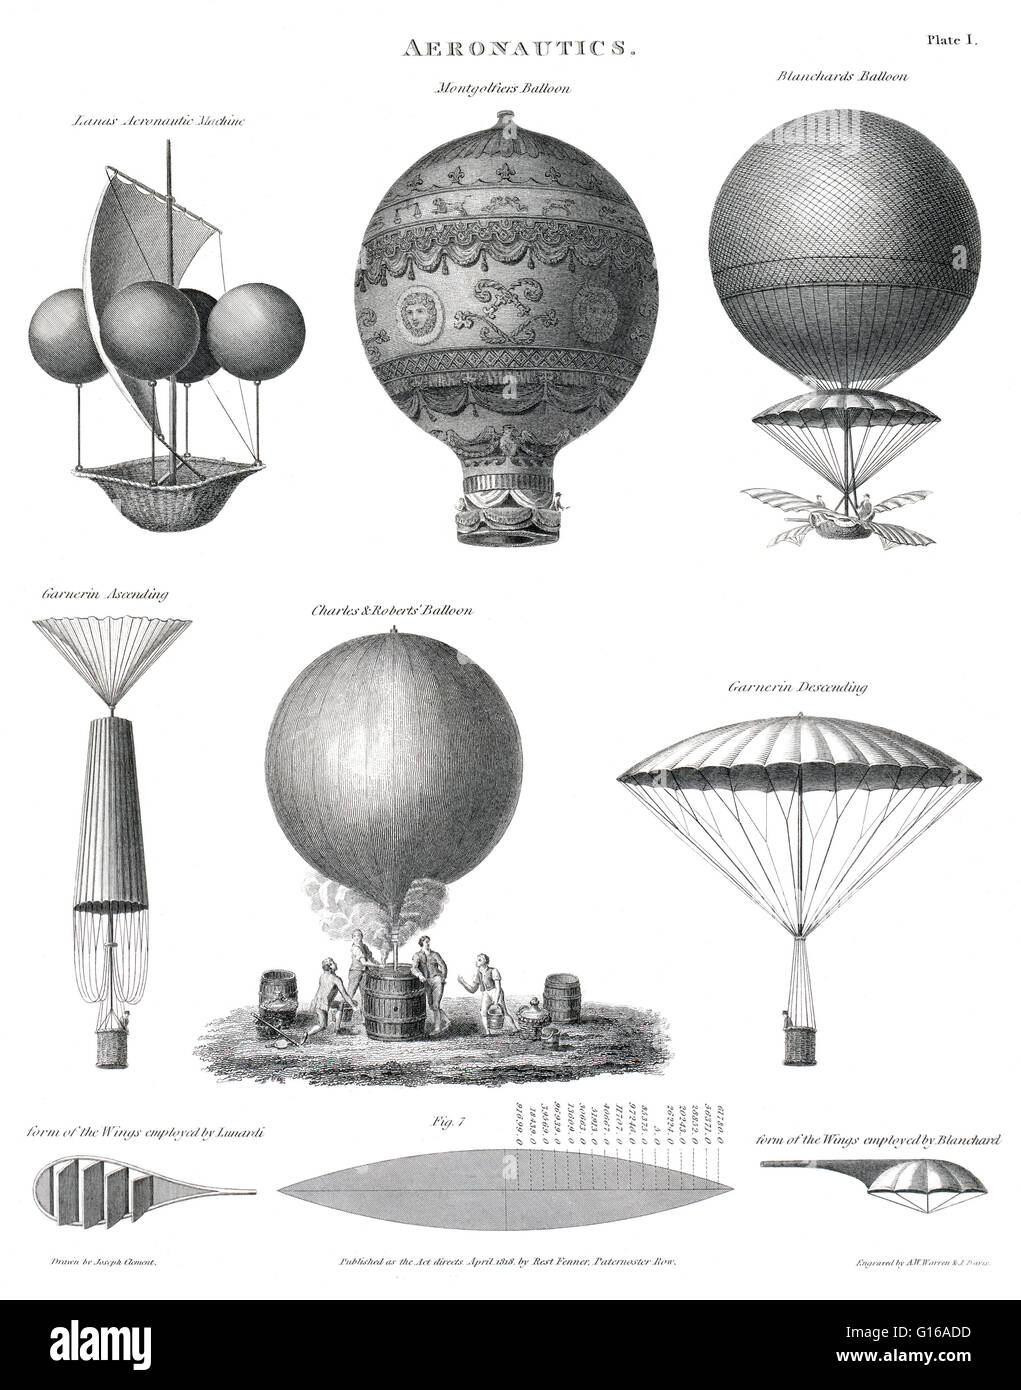 Technical illustration shows early balloon designs: Lana's aeronautic machine, Montgolfiers' balloon, Blanchard's balloon, Garnerin ascending and descending in his parachute, the Charles & Roberts' balloon being inflated, the form of the wings employed by Stock Photo